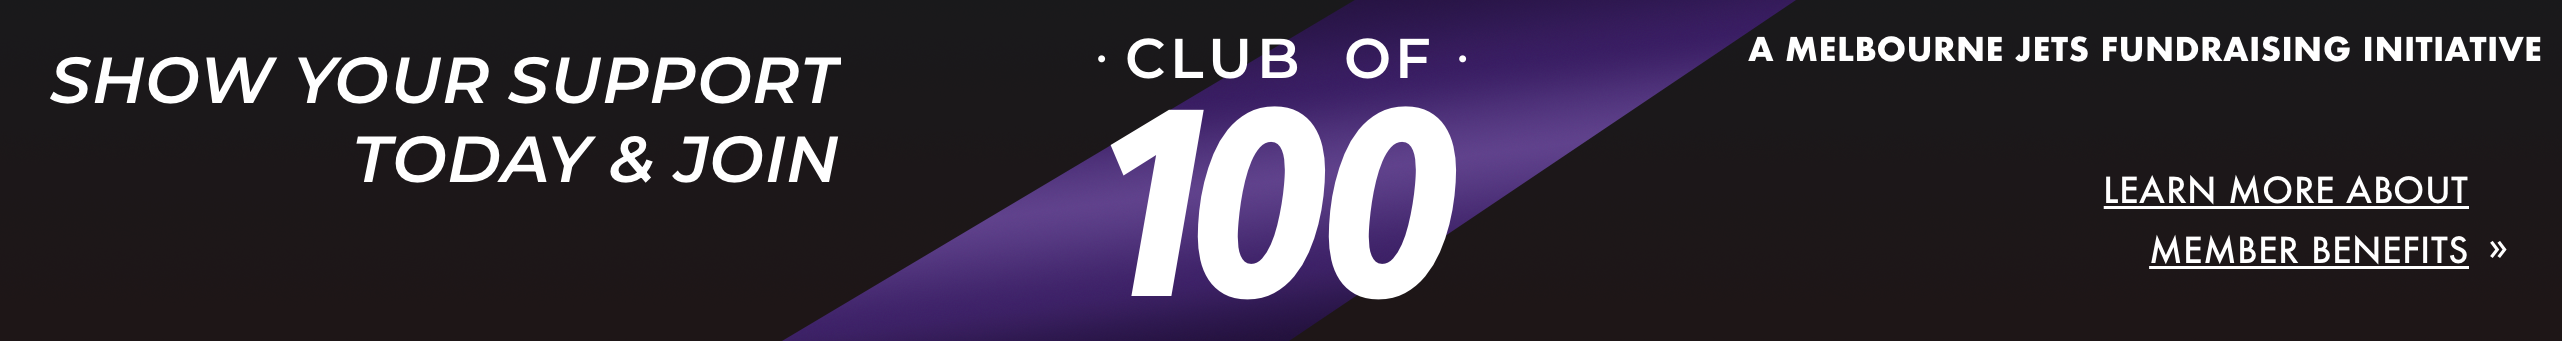 Join Club of 100 & Support Melbourne Jets. Follow this link to learn more